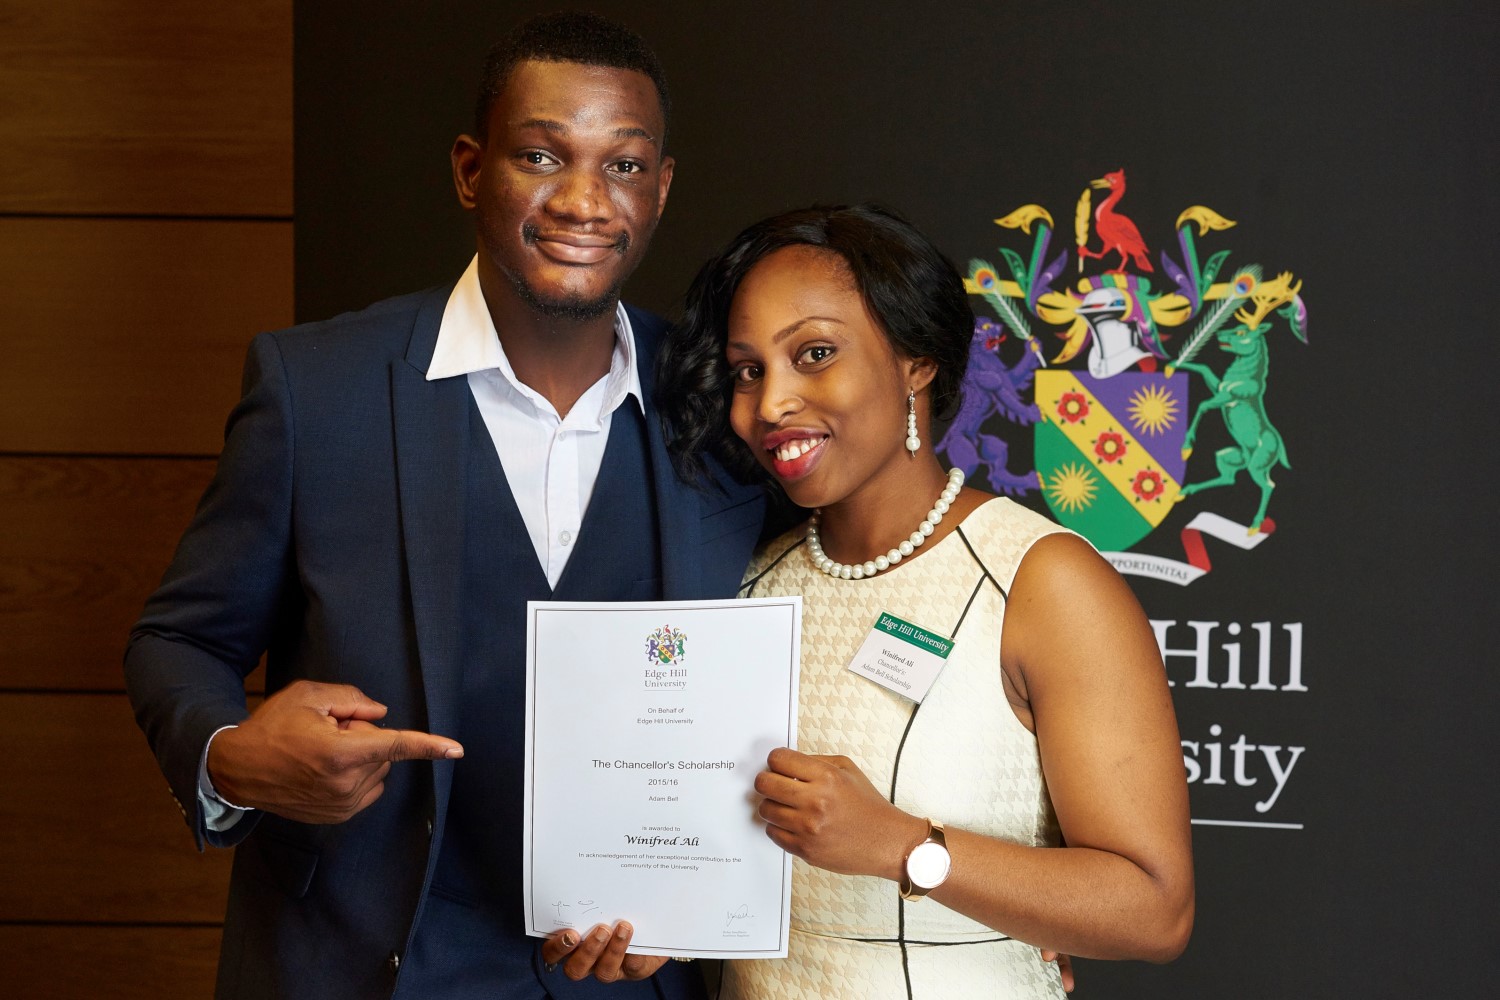 Student Winifred Ali, with her father, showing her University Scholarship Certificate at a Scholarship Awards Evening.